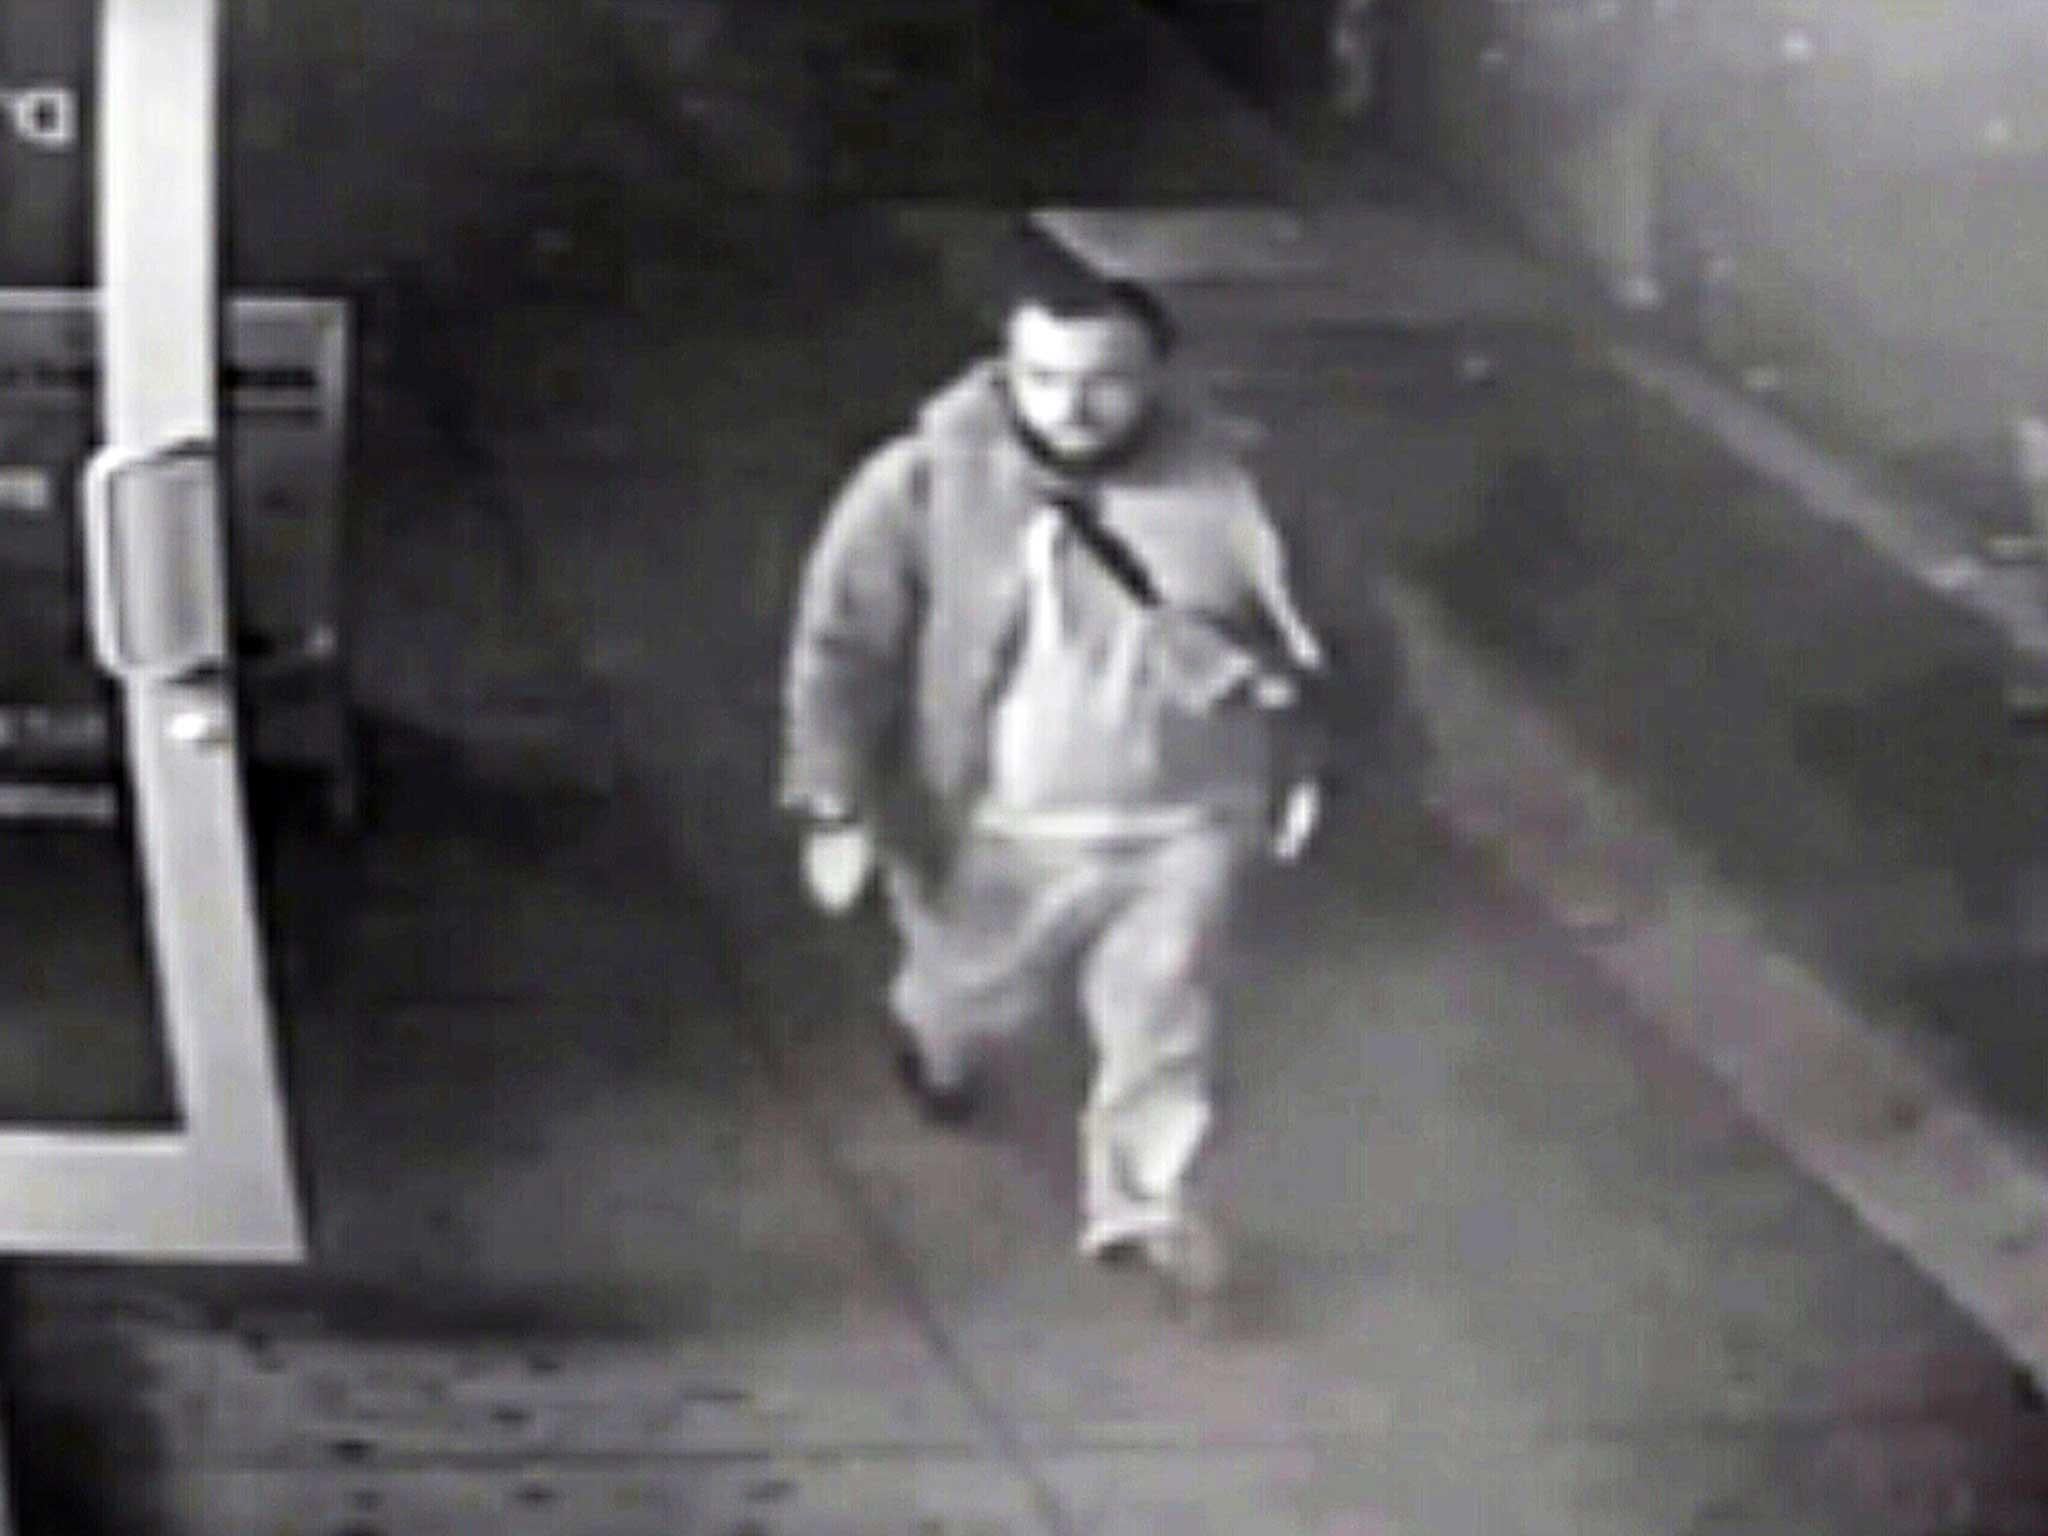 &#13;
A surveillance image showing naturalized US citizen, 28-year-old New Jersey resident Ahmad Khan Rahami &#13;